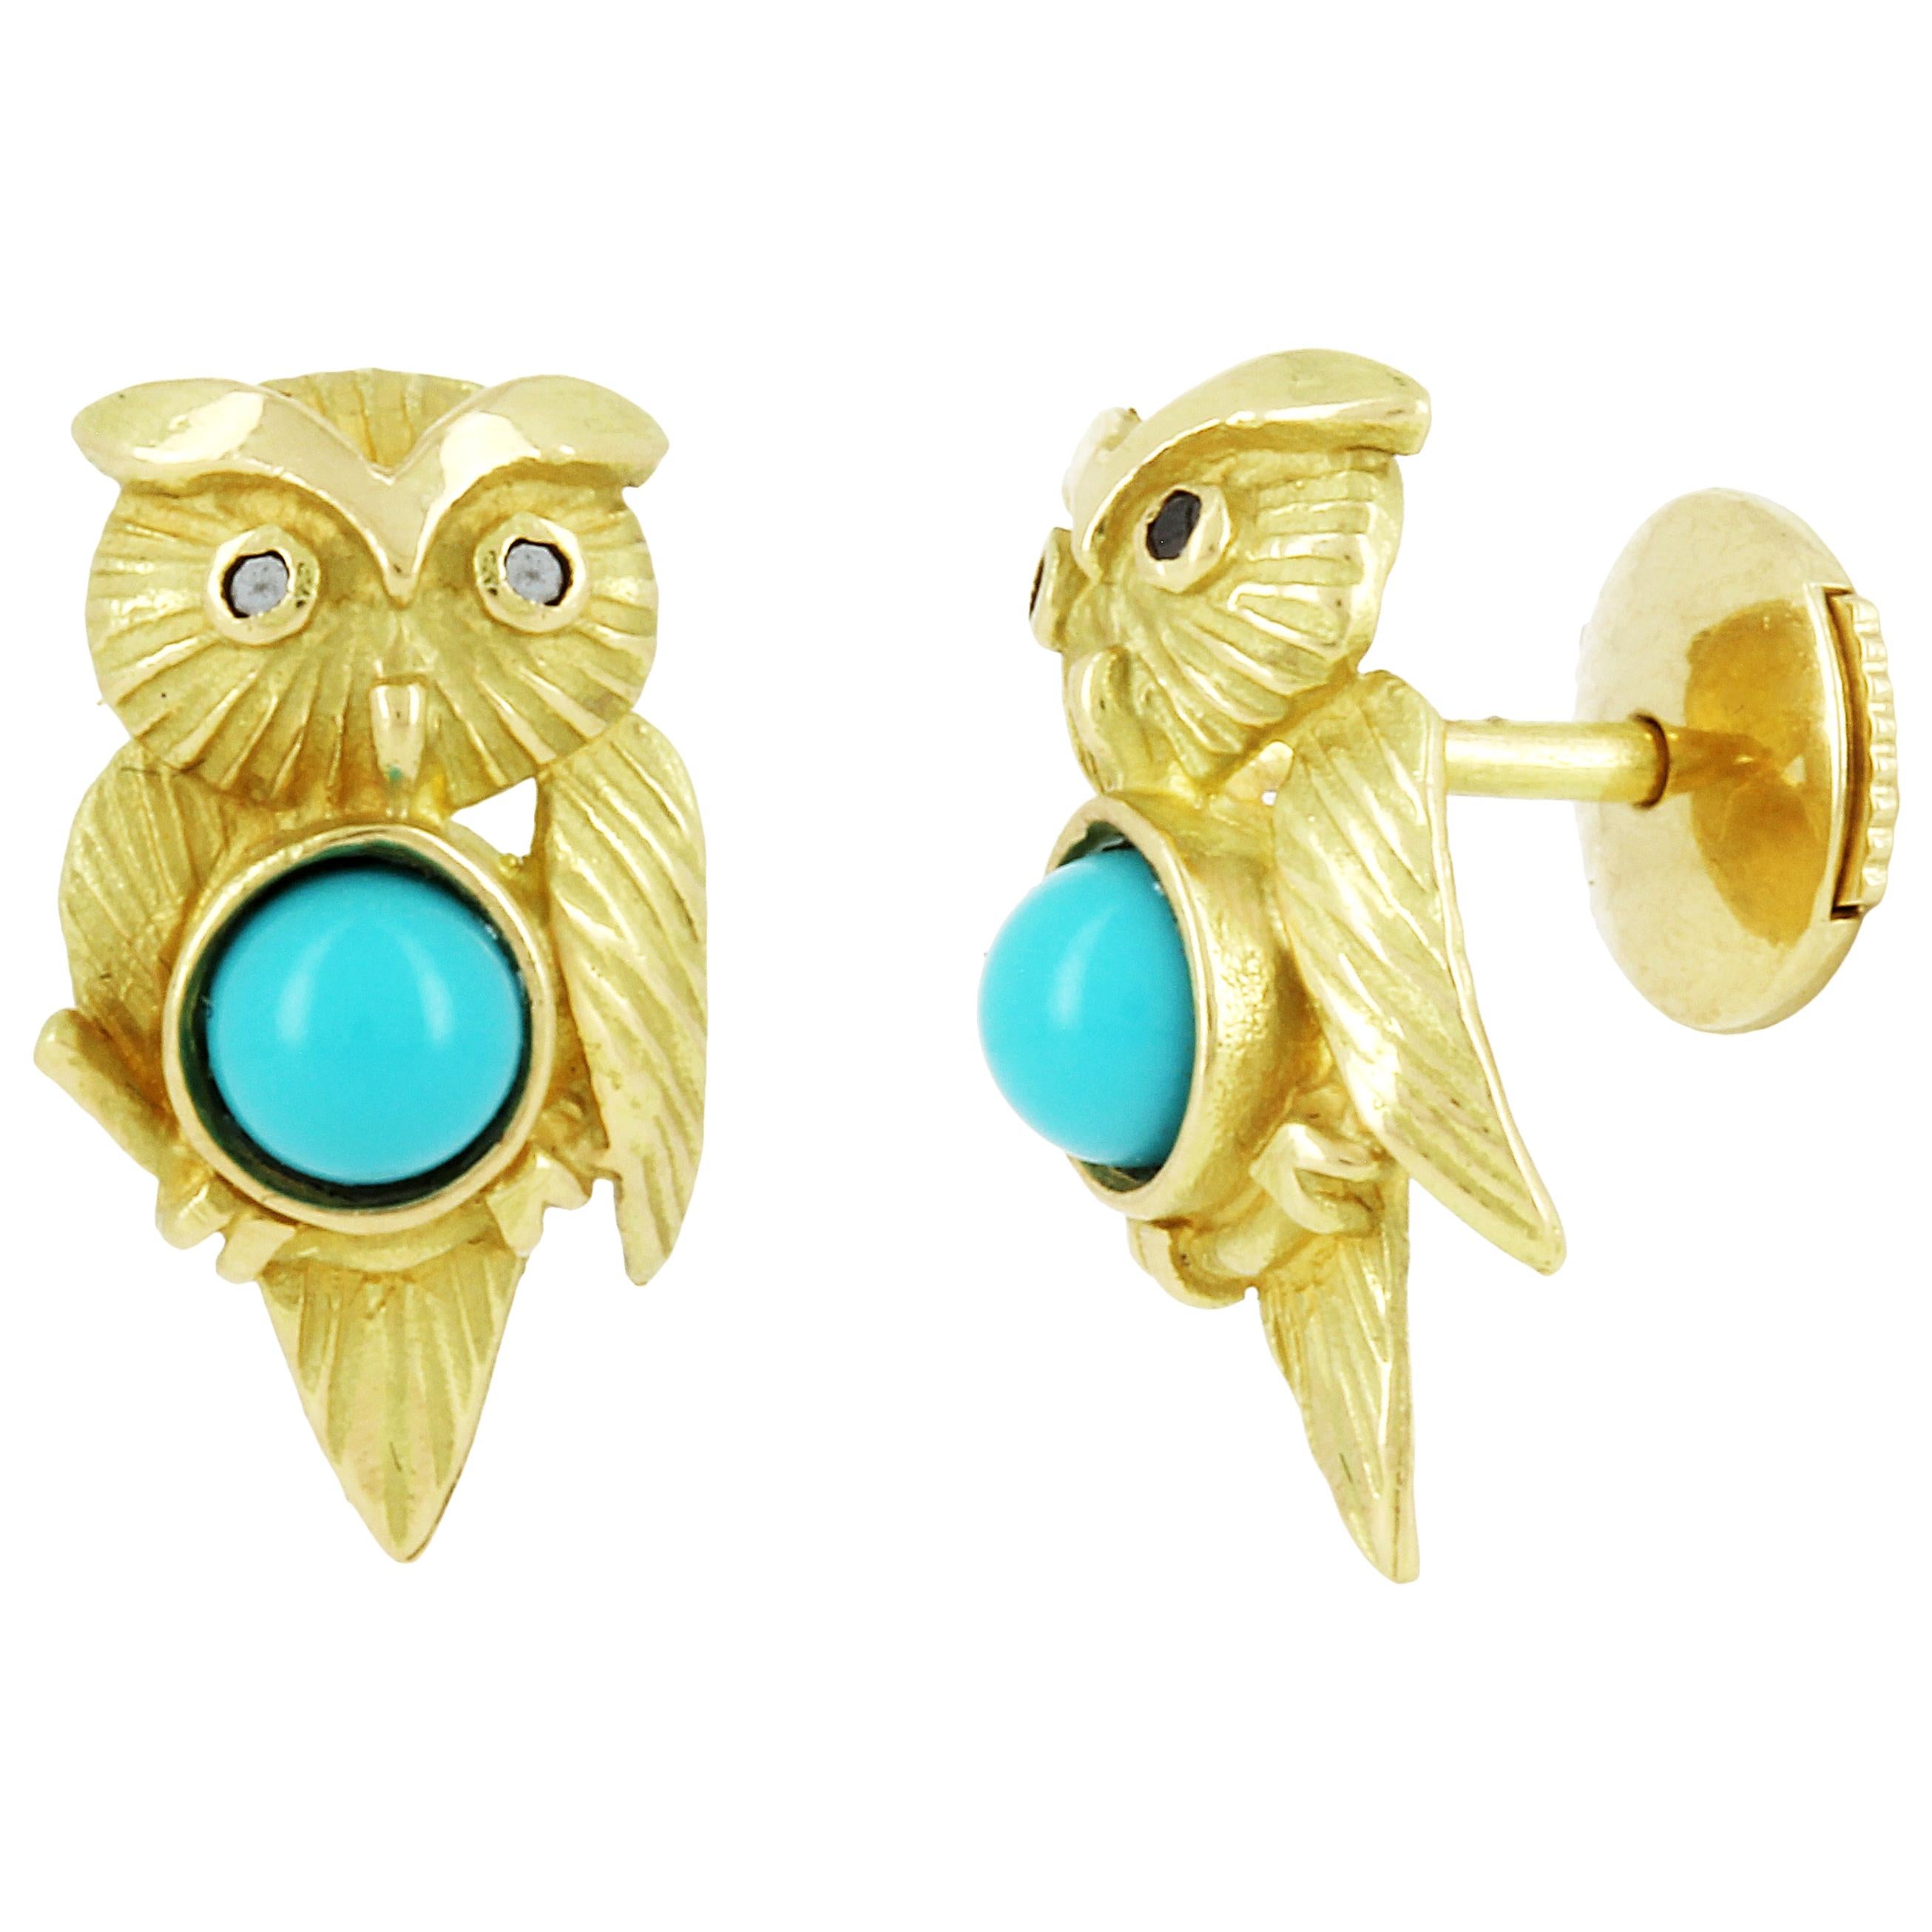 Yvonne Leon's Pair of Owl Earrings Studs in 18 Carat Yellow Gold and Turquoises For Sale